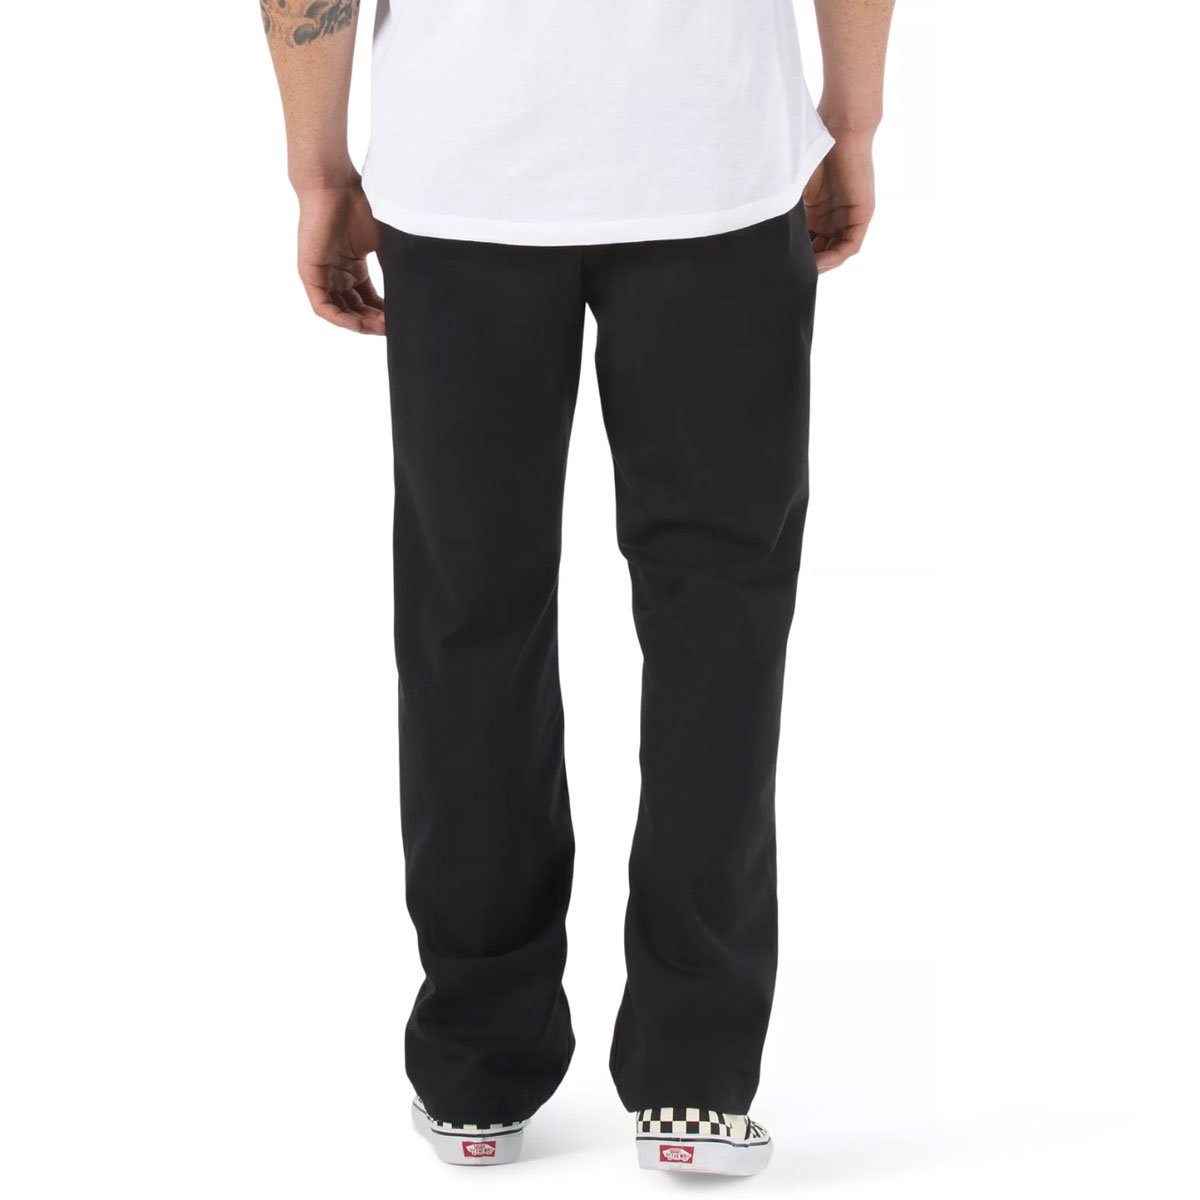 Vans Authentic Chino Relaxed Pants - black image 2